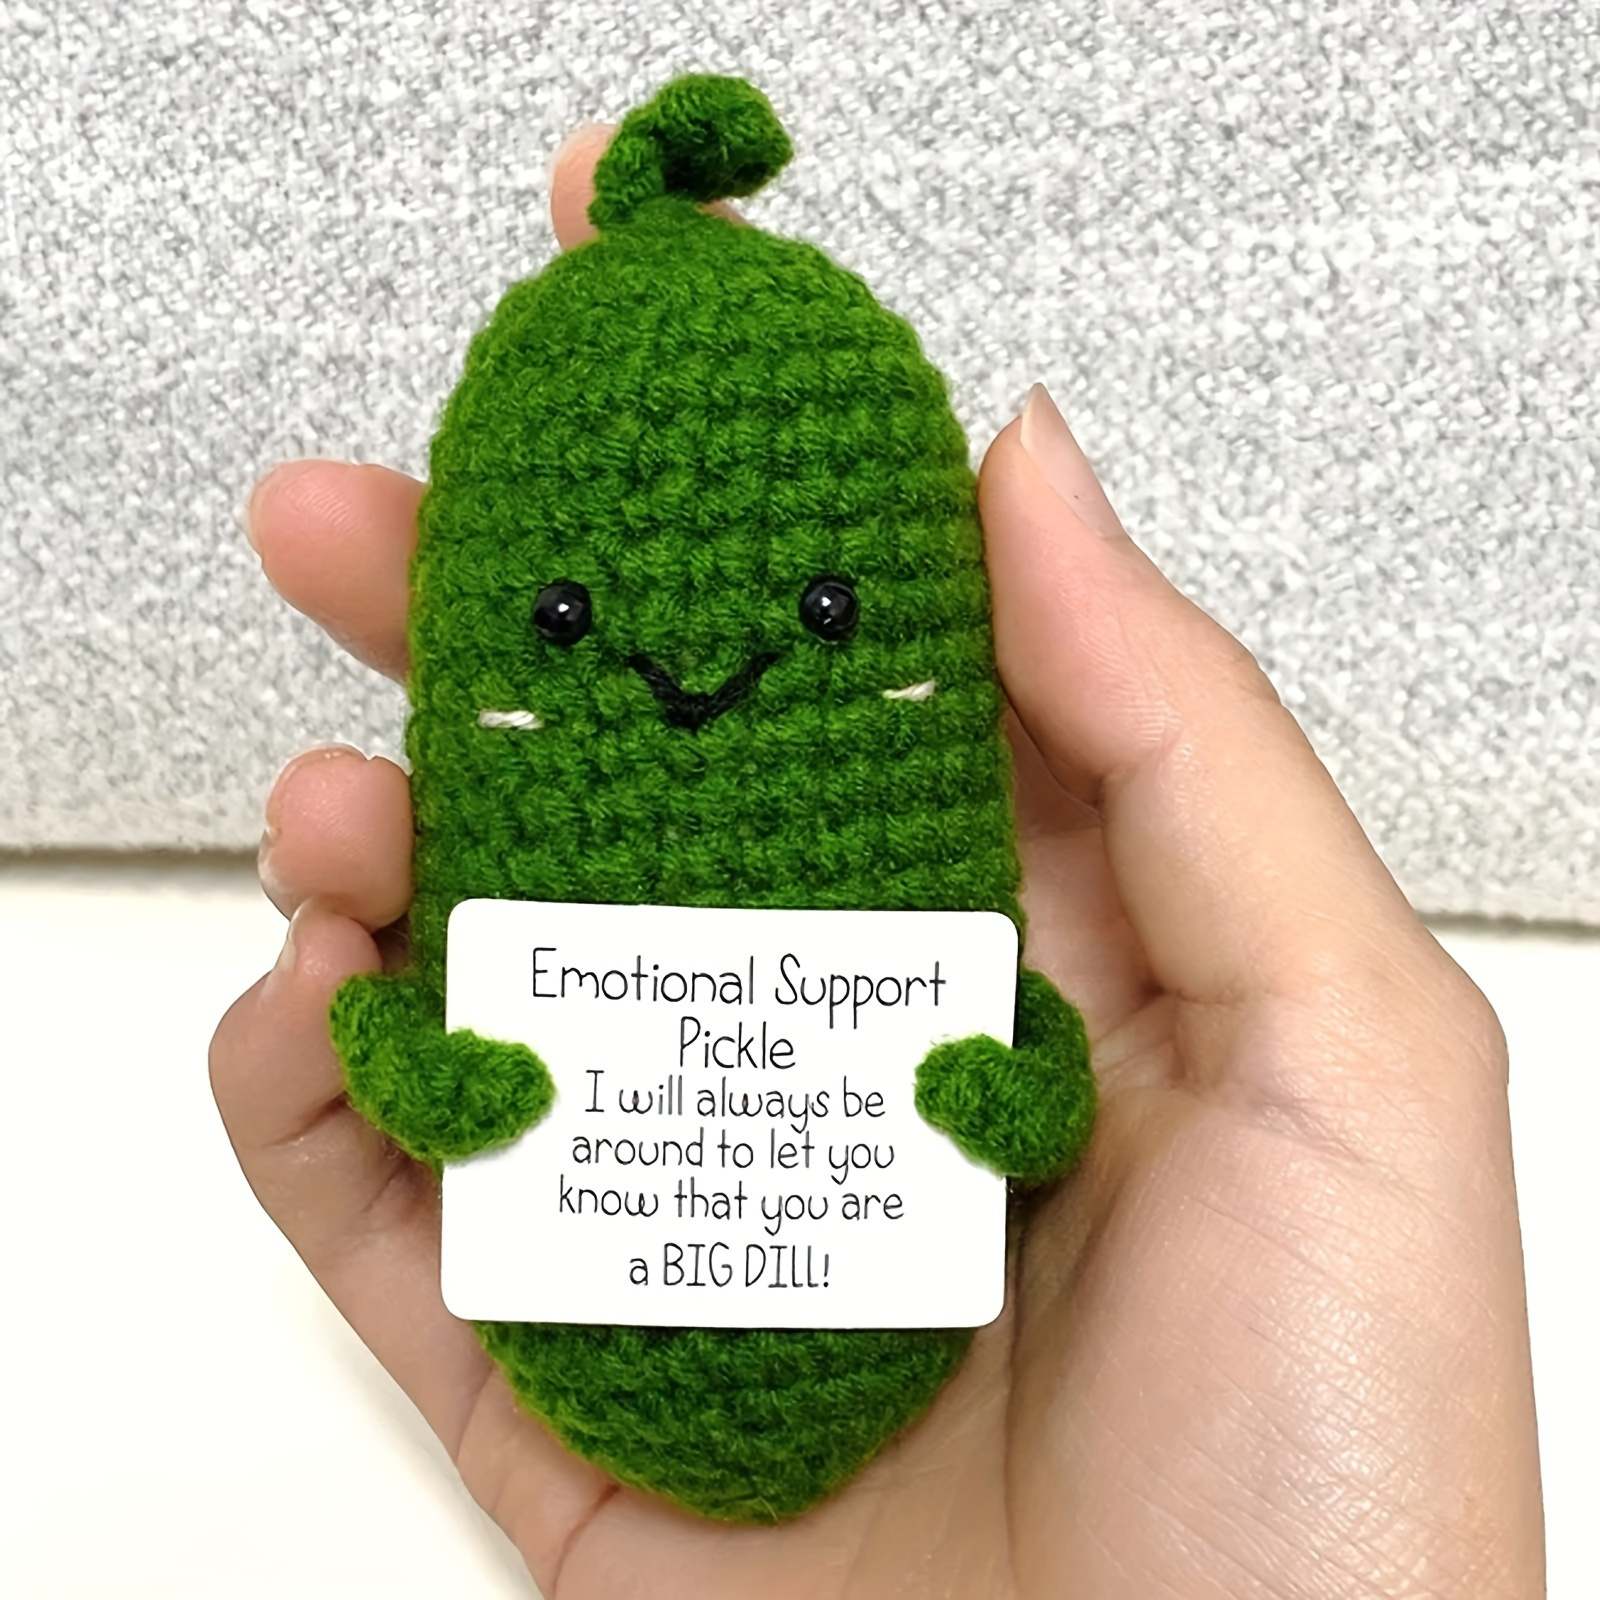 Emotional Support Pickle Crochet, Emotional Support Plush Cucumber